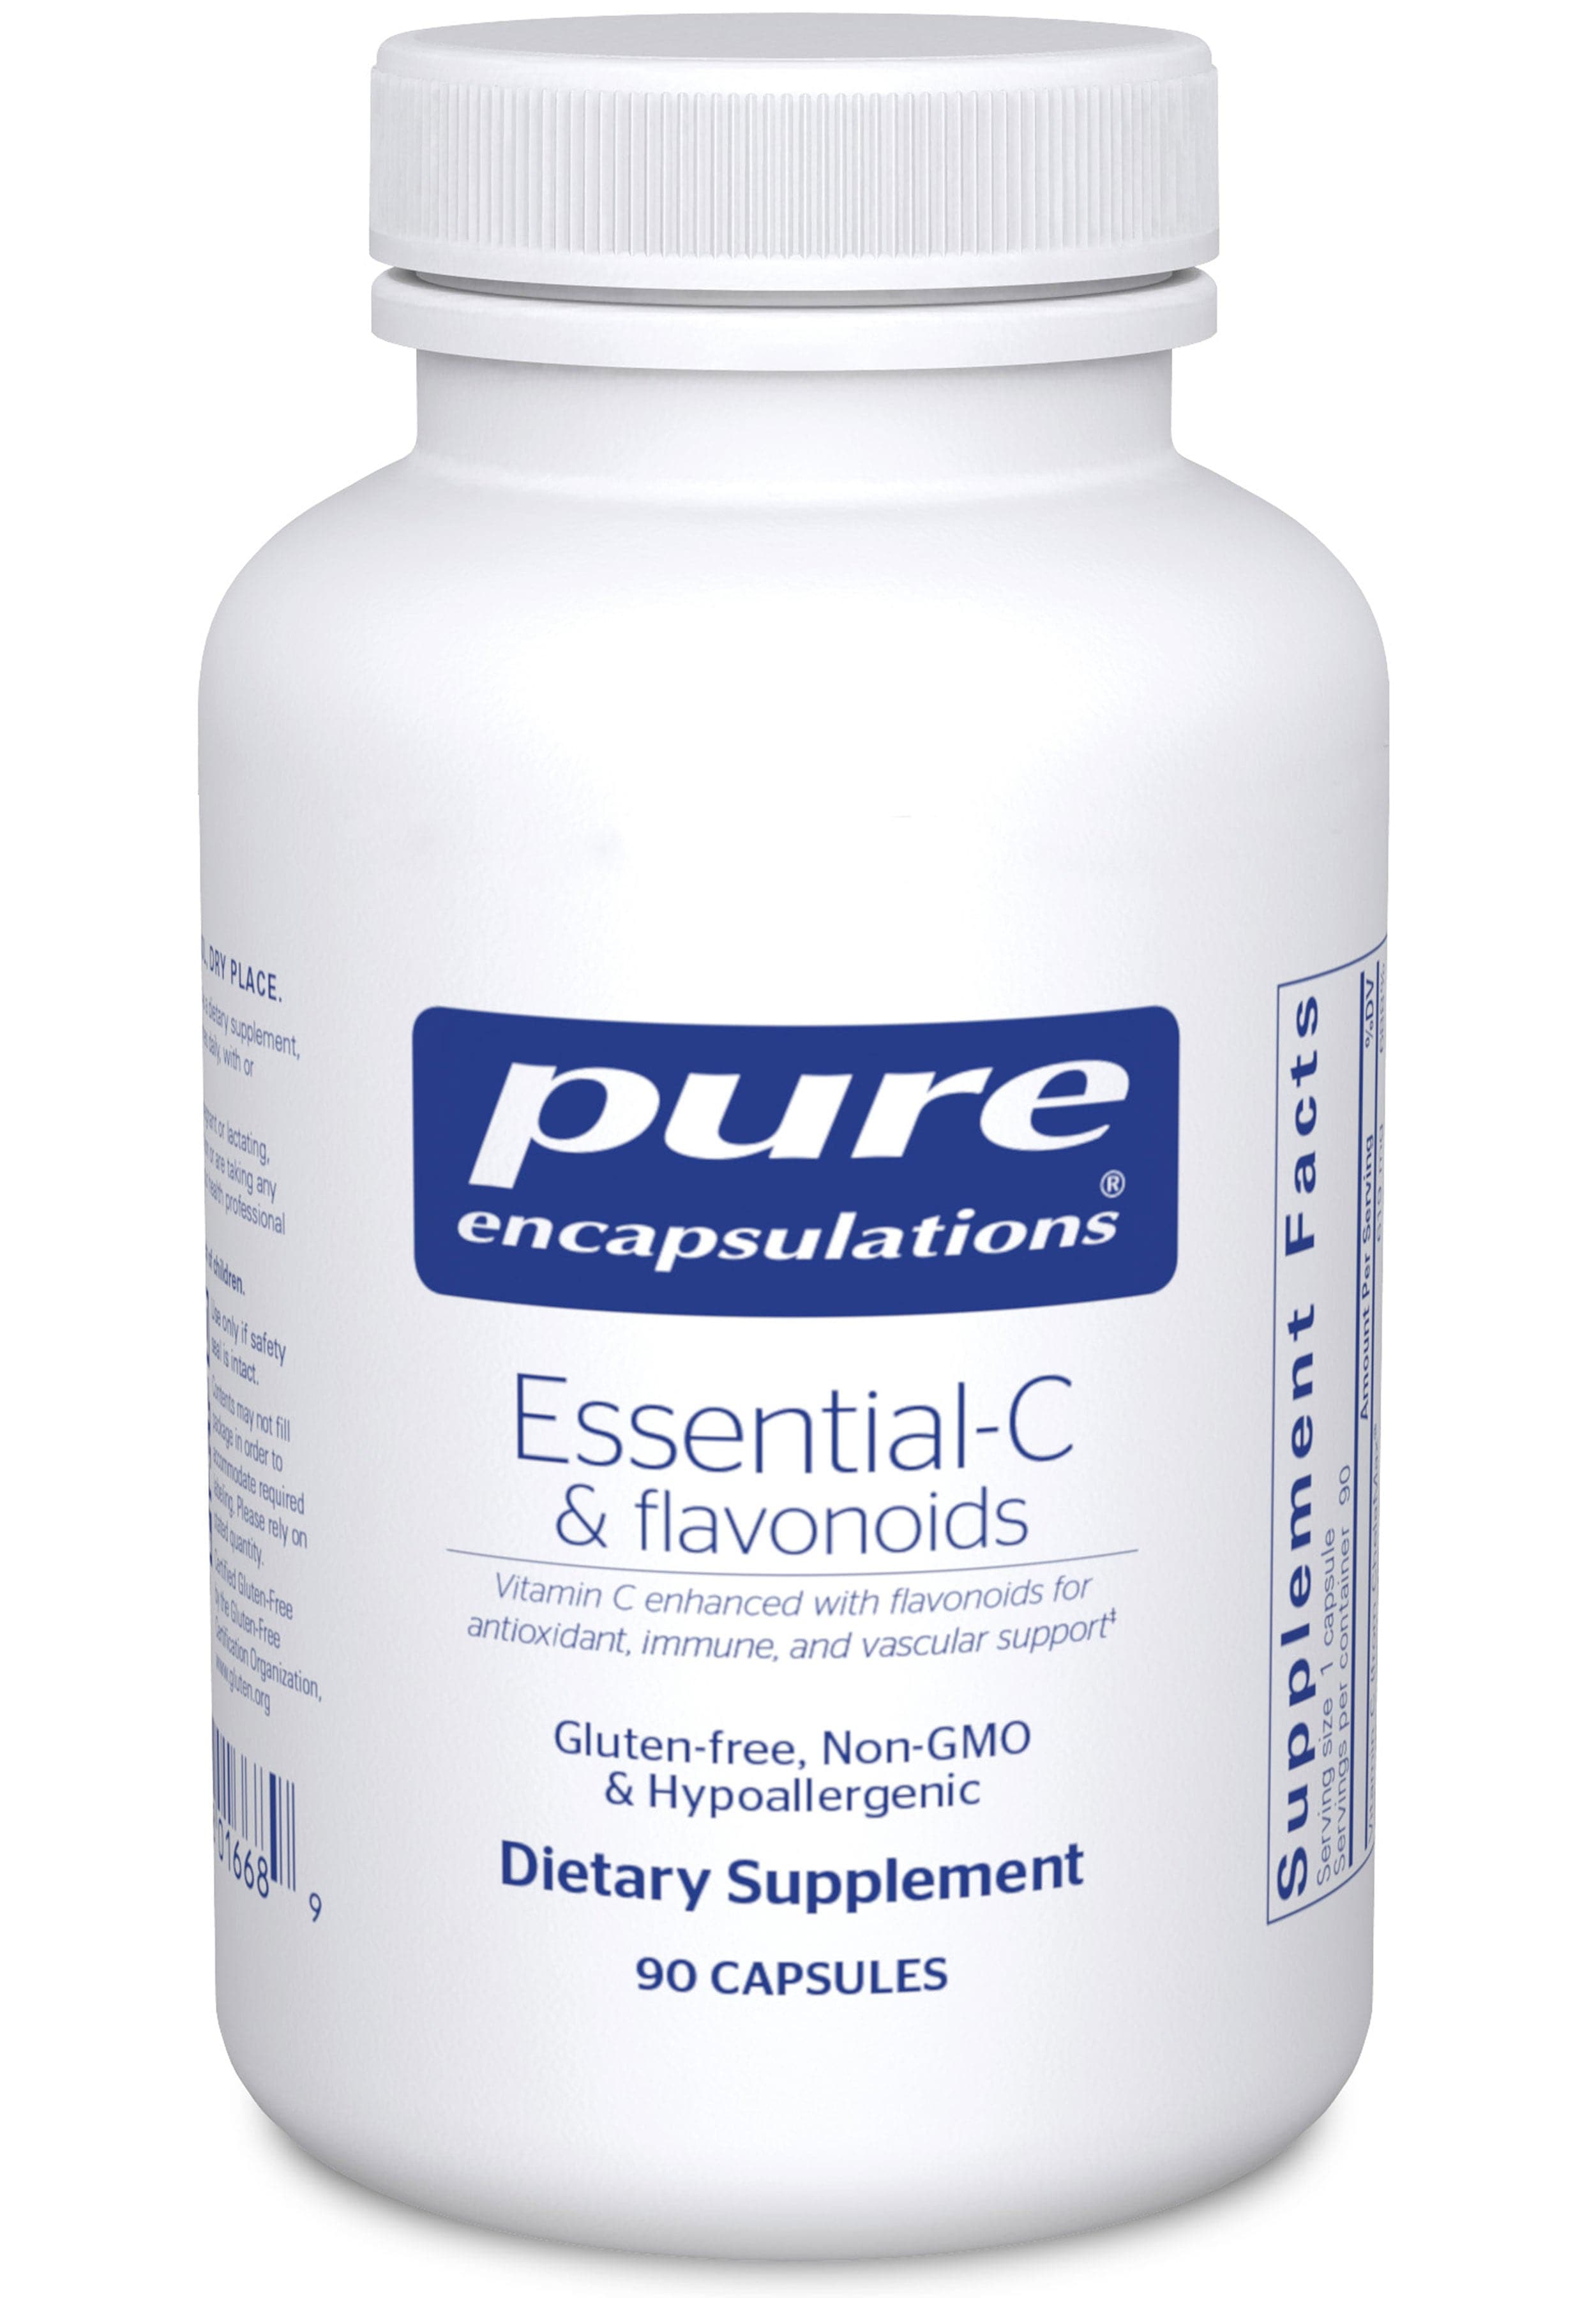 Pure Encapsulations Ester-C and Flavonoids (Formerly Essential-C and Flavonoids)